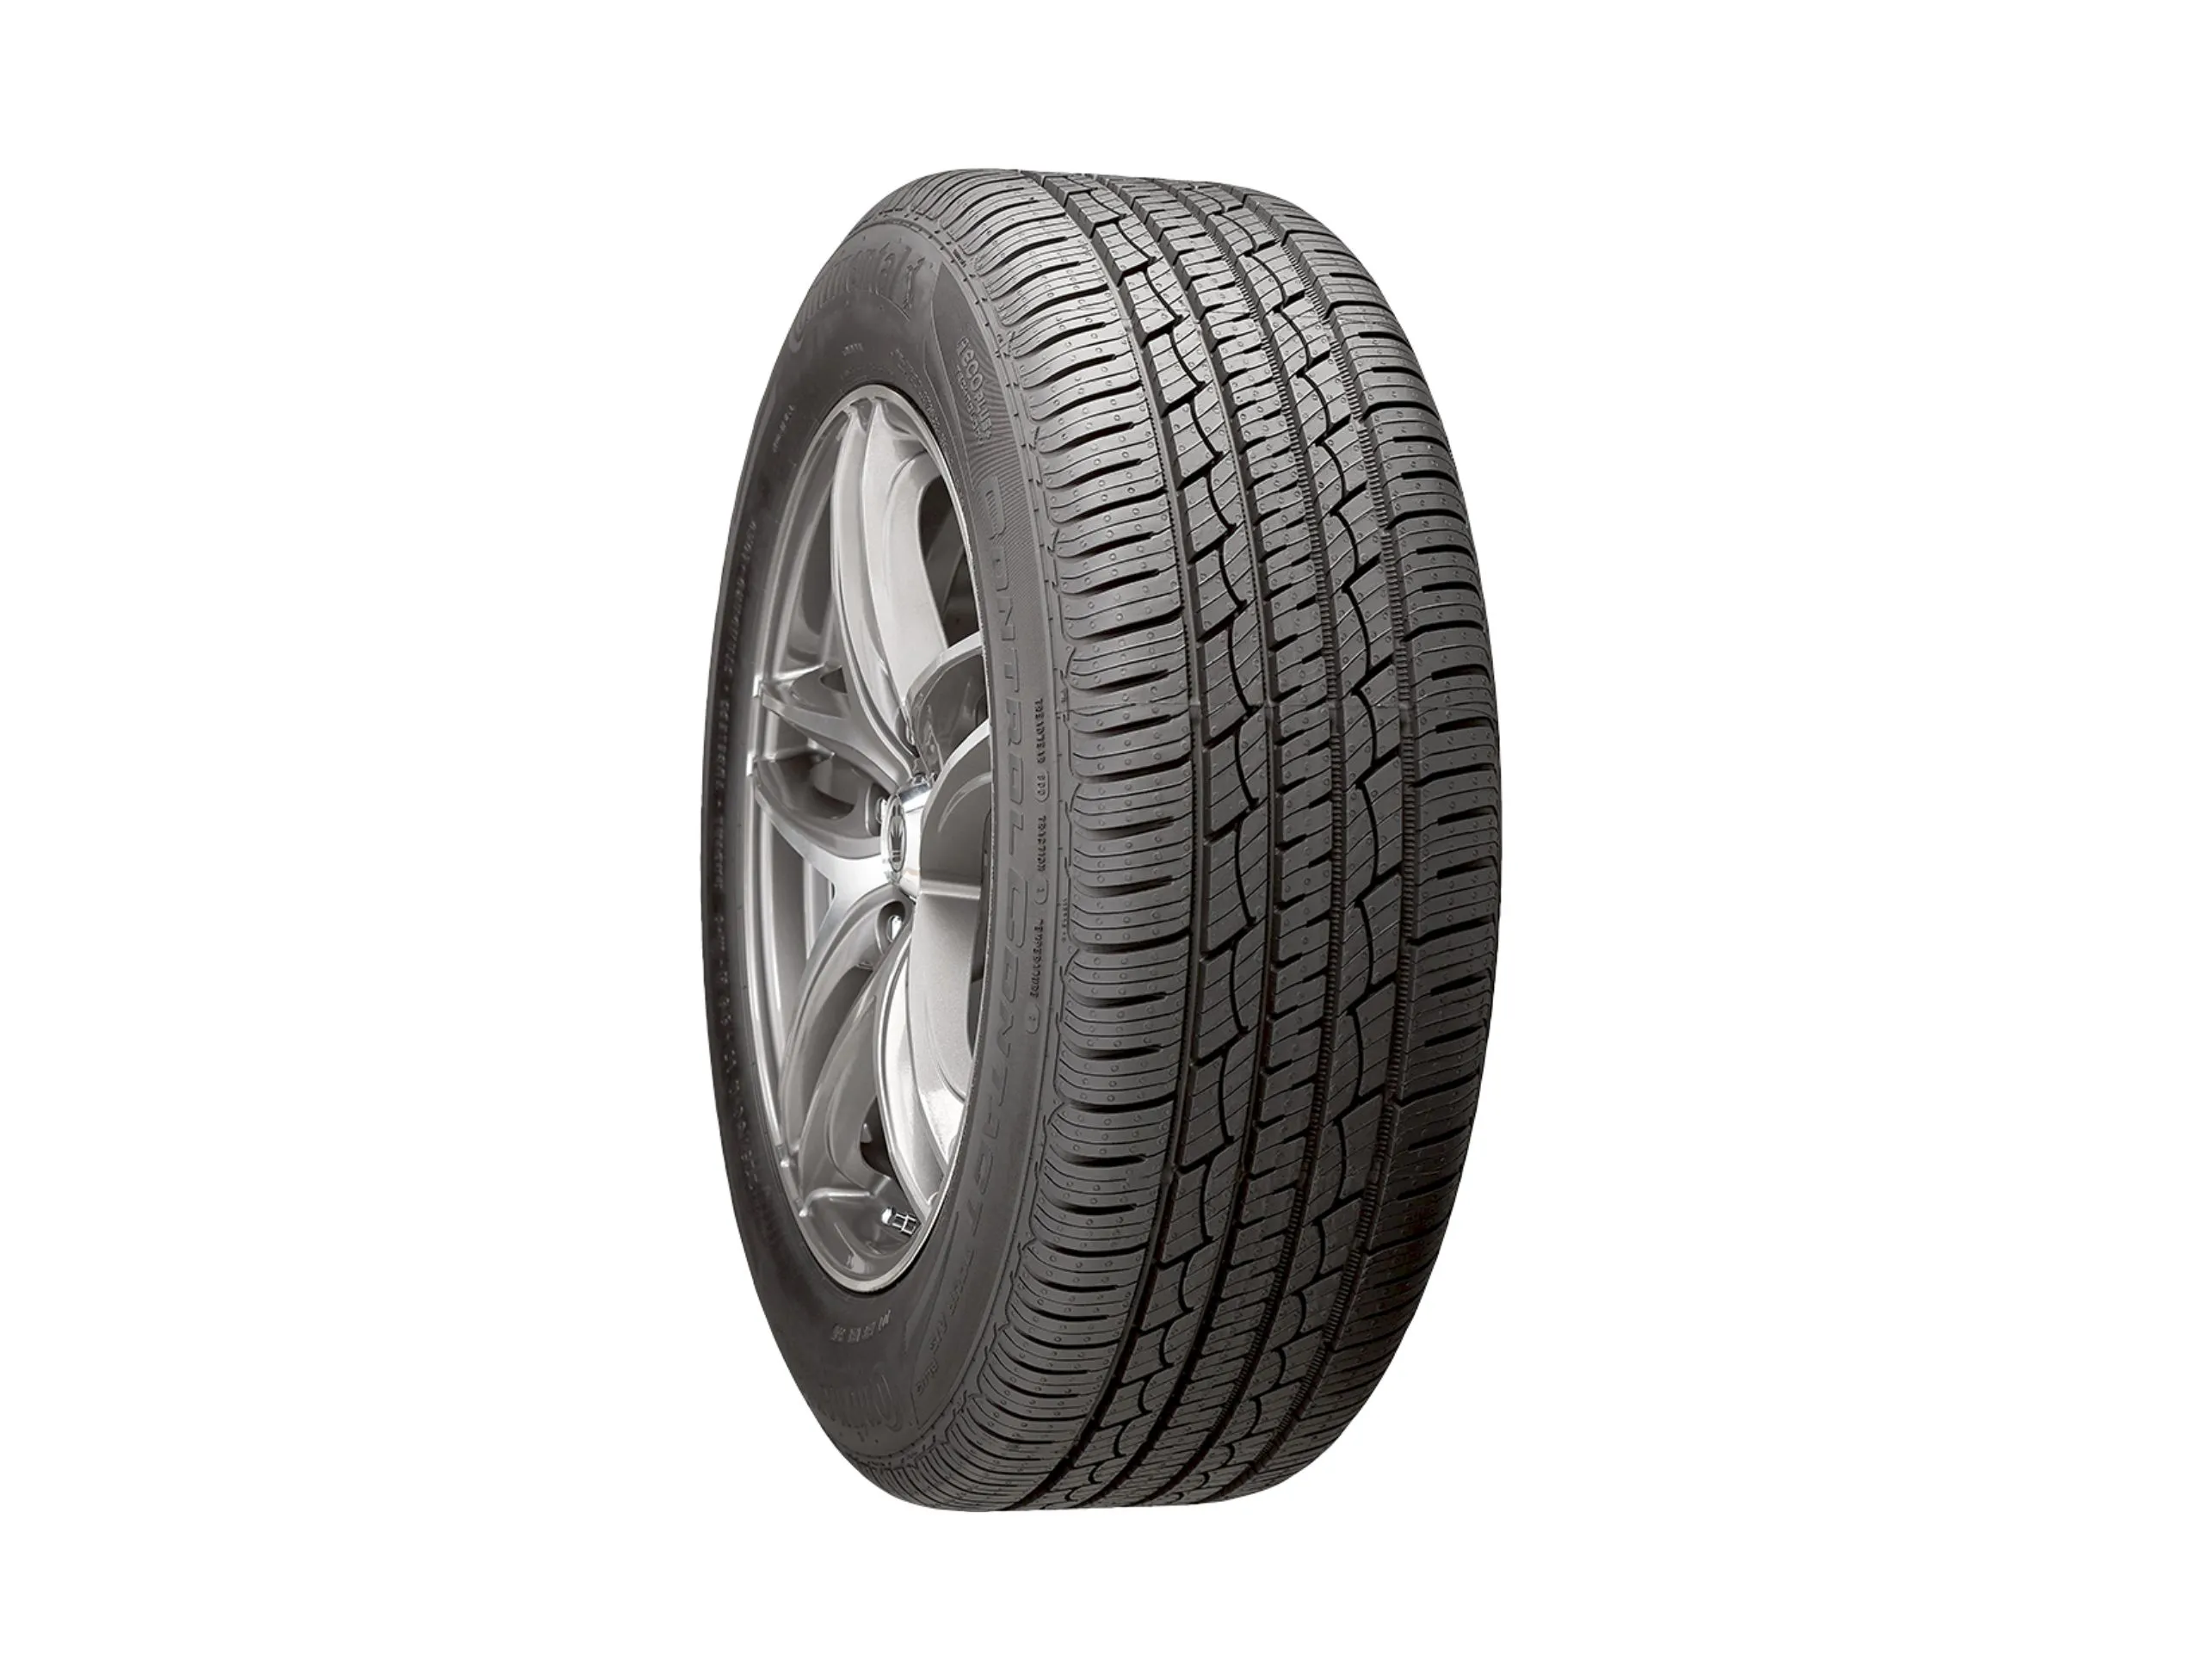 Alloys A/S 185/65 Continental R14 Plus 86H - Tour Tires Contact N Tire Control